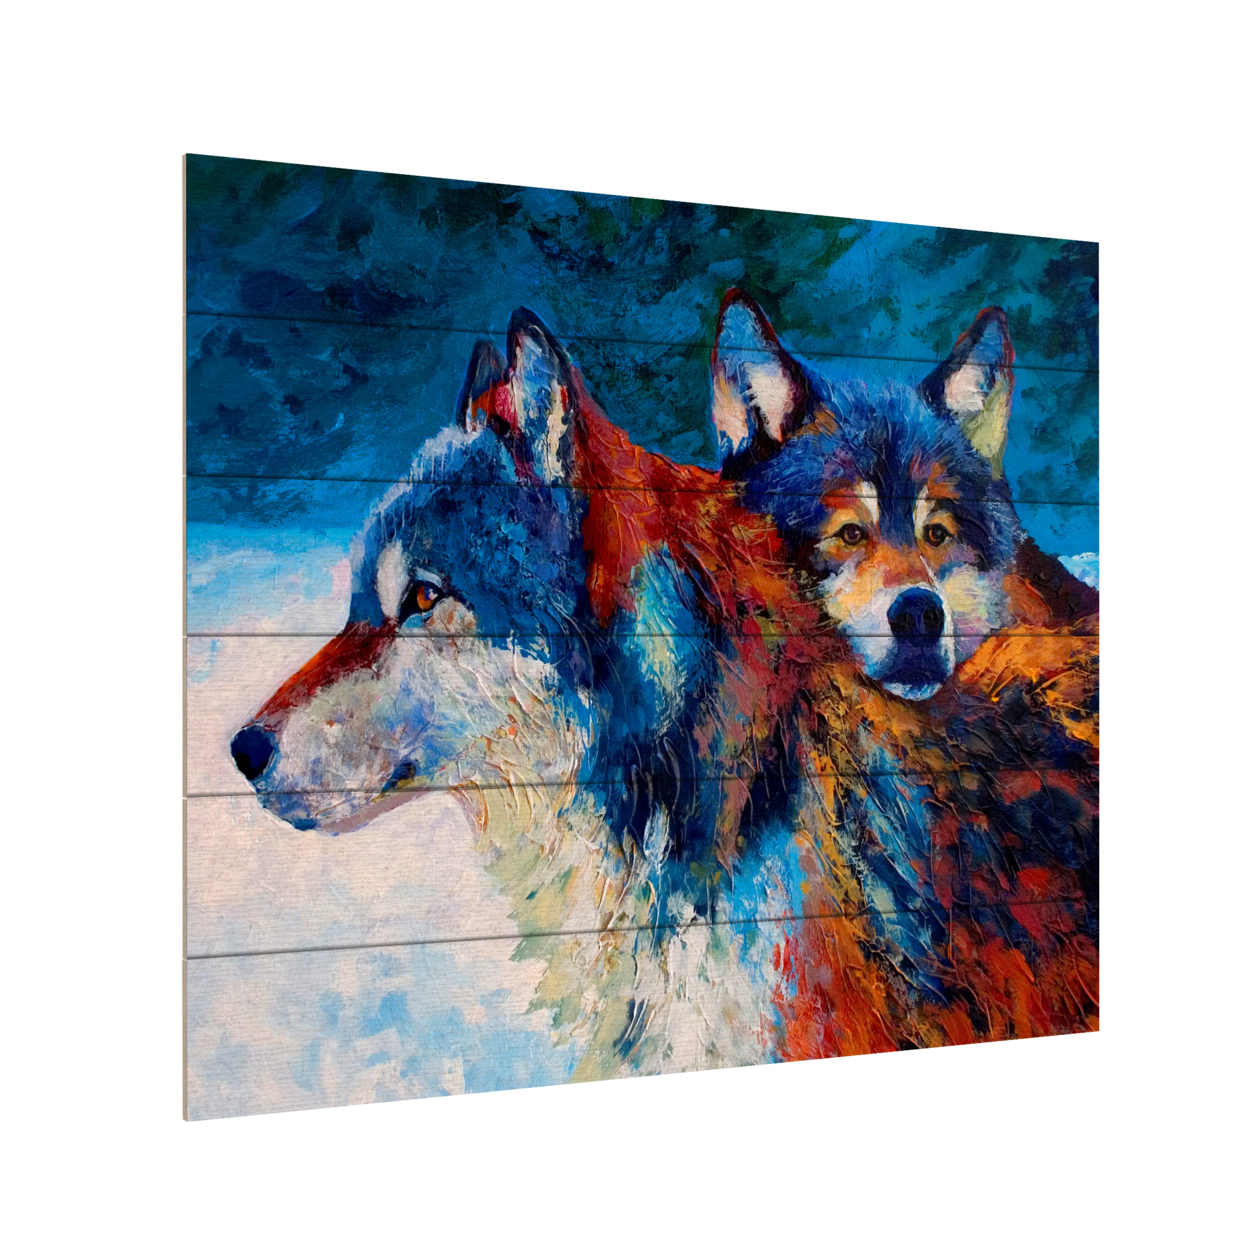 Wooden Slat Art 18 X 22 Inches Titled Wolves Ready To Hang Home Decor Picture